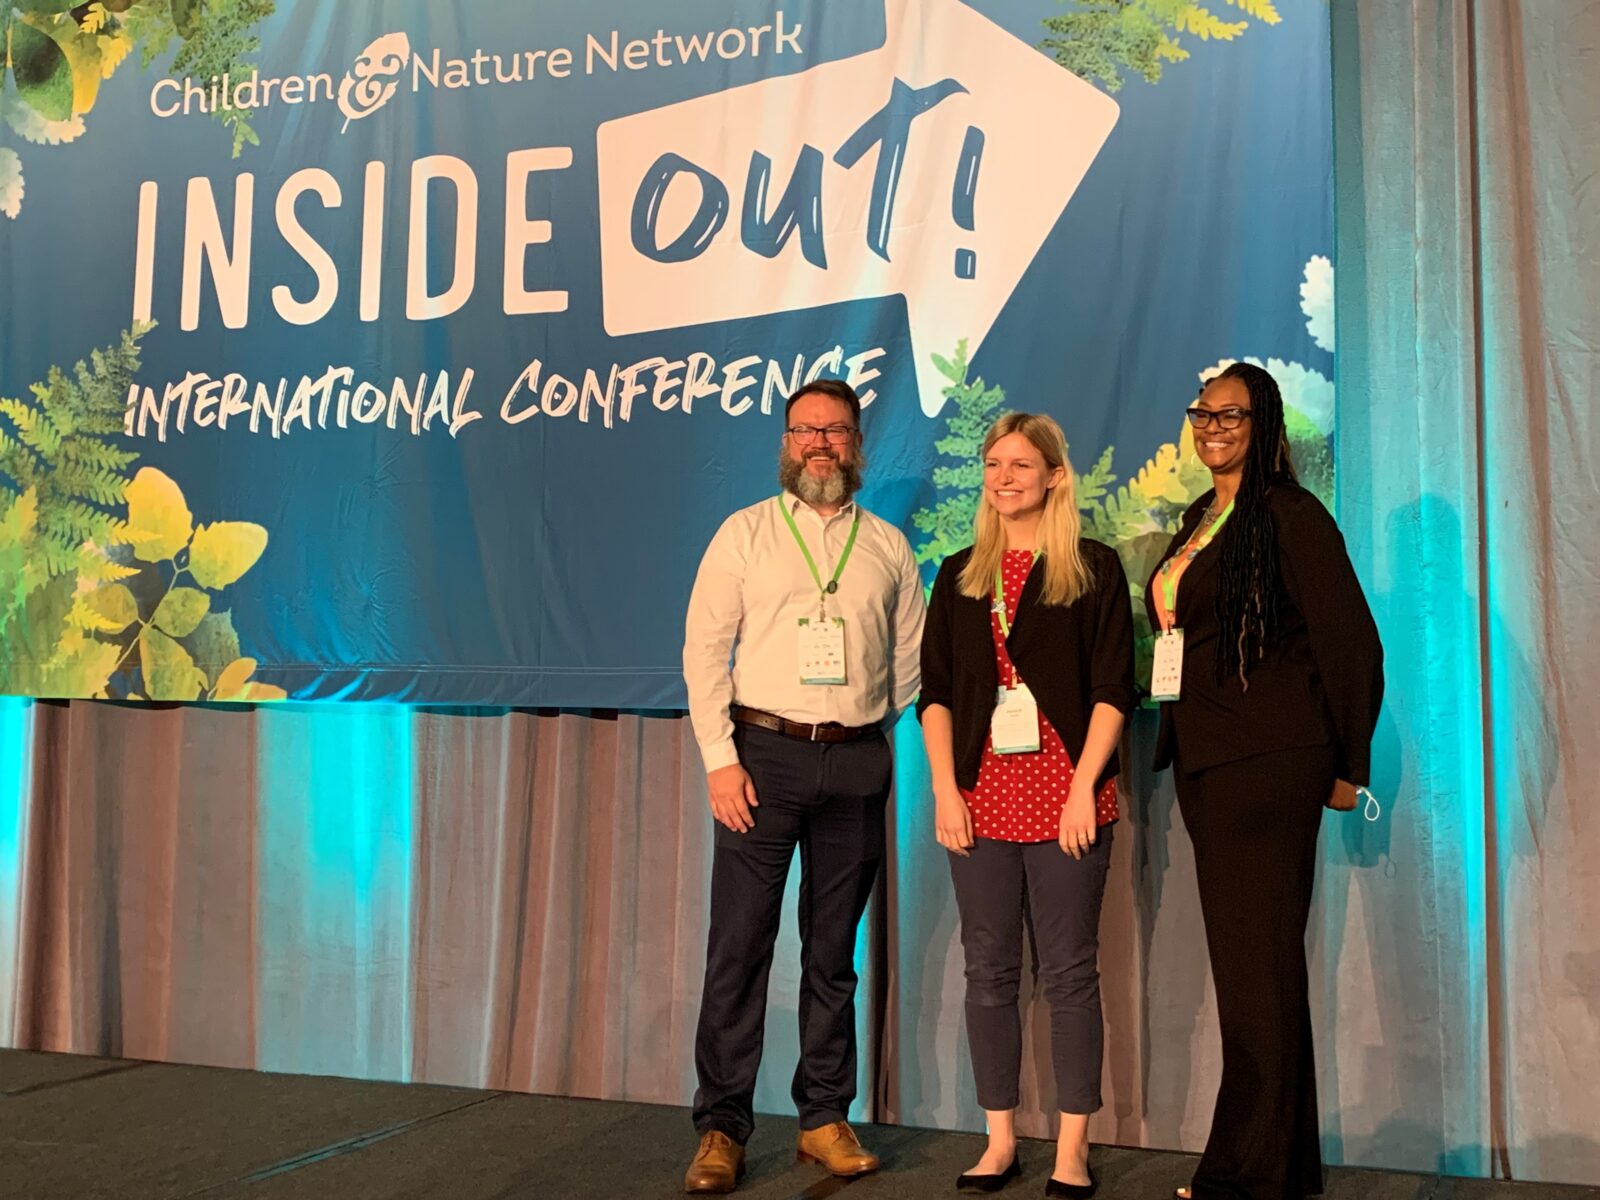 Three people stand on a stage in front of a banner that reads, "Inside Out! International Conference".